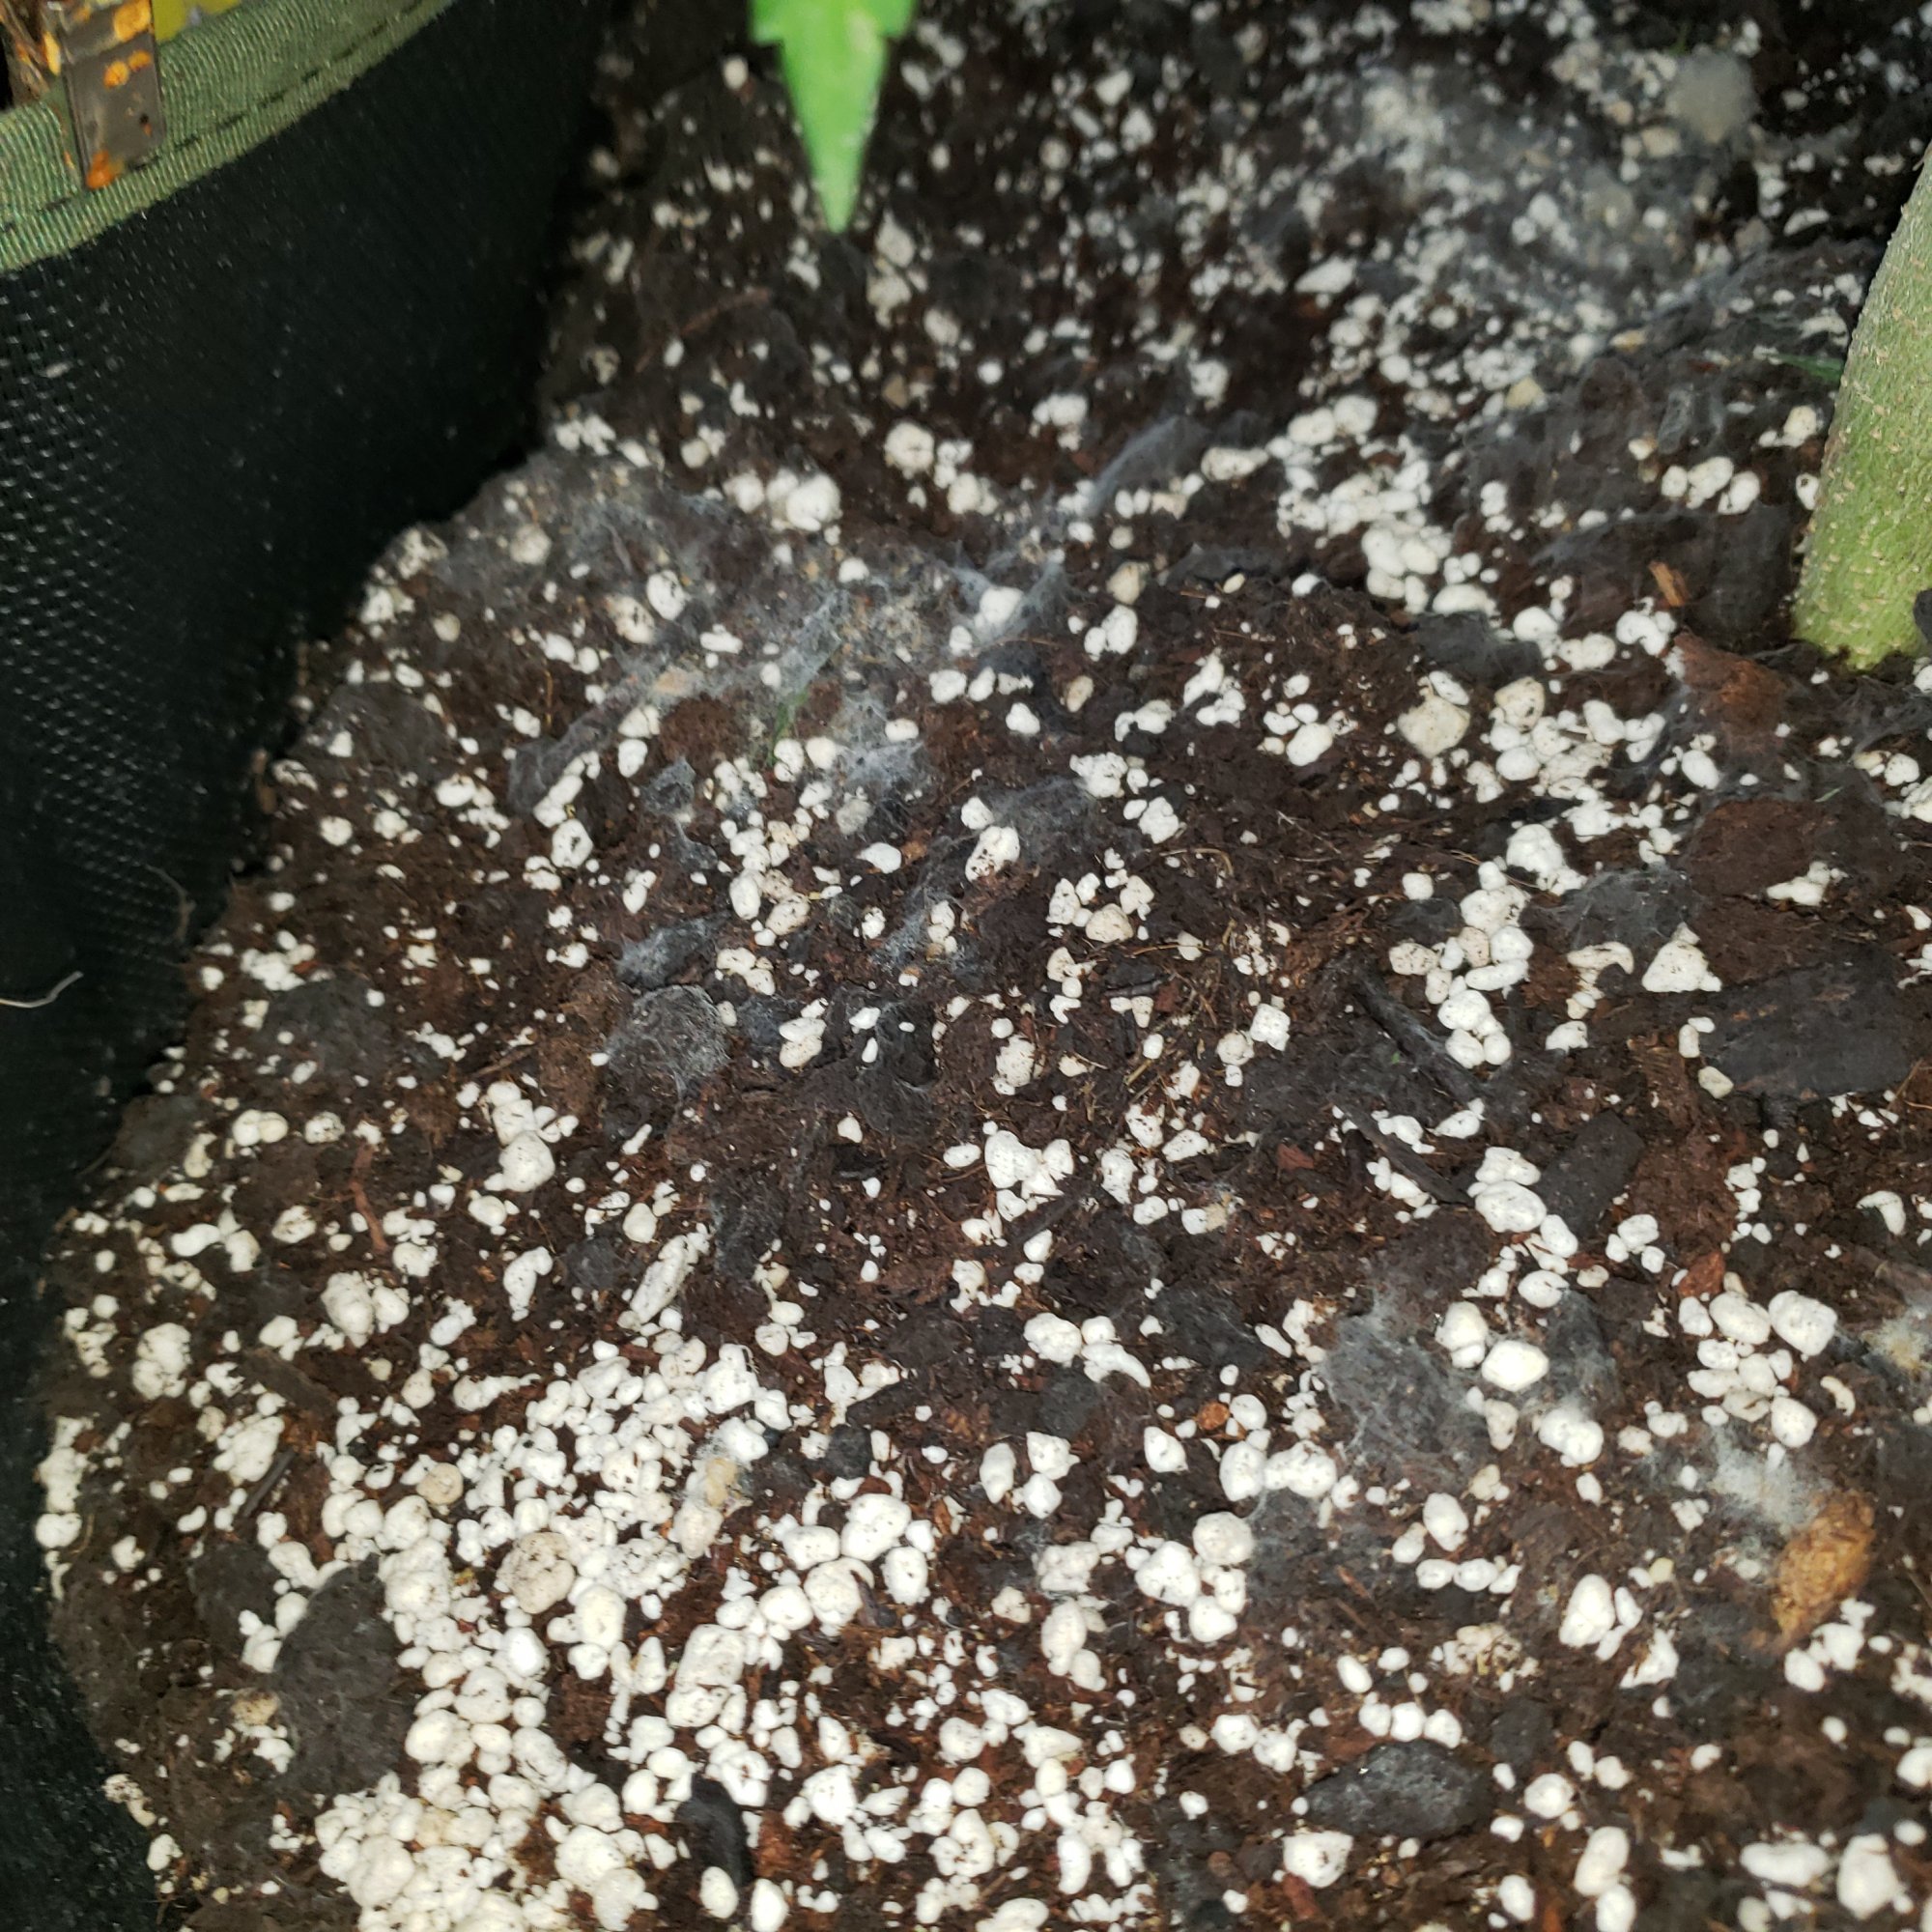 Having mildew or molding issue in the soil and now it is appearing on the leaves